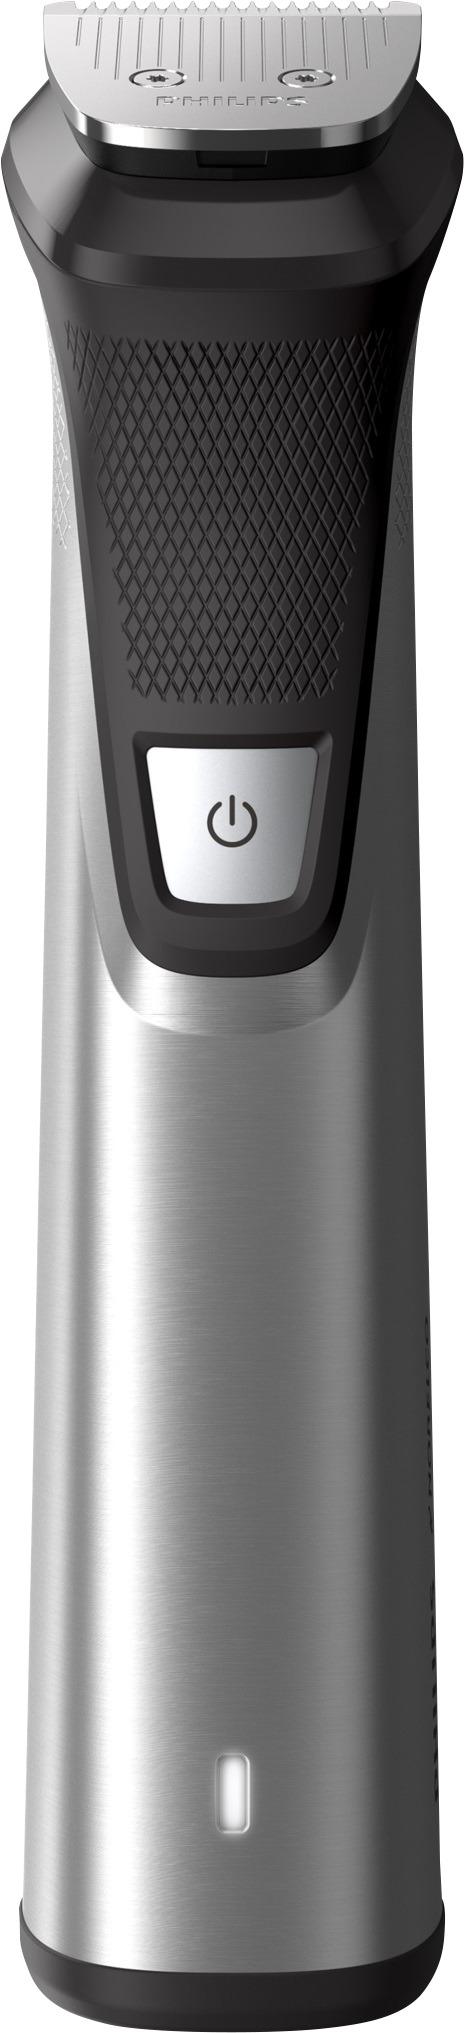 philips 7750 trimmer